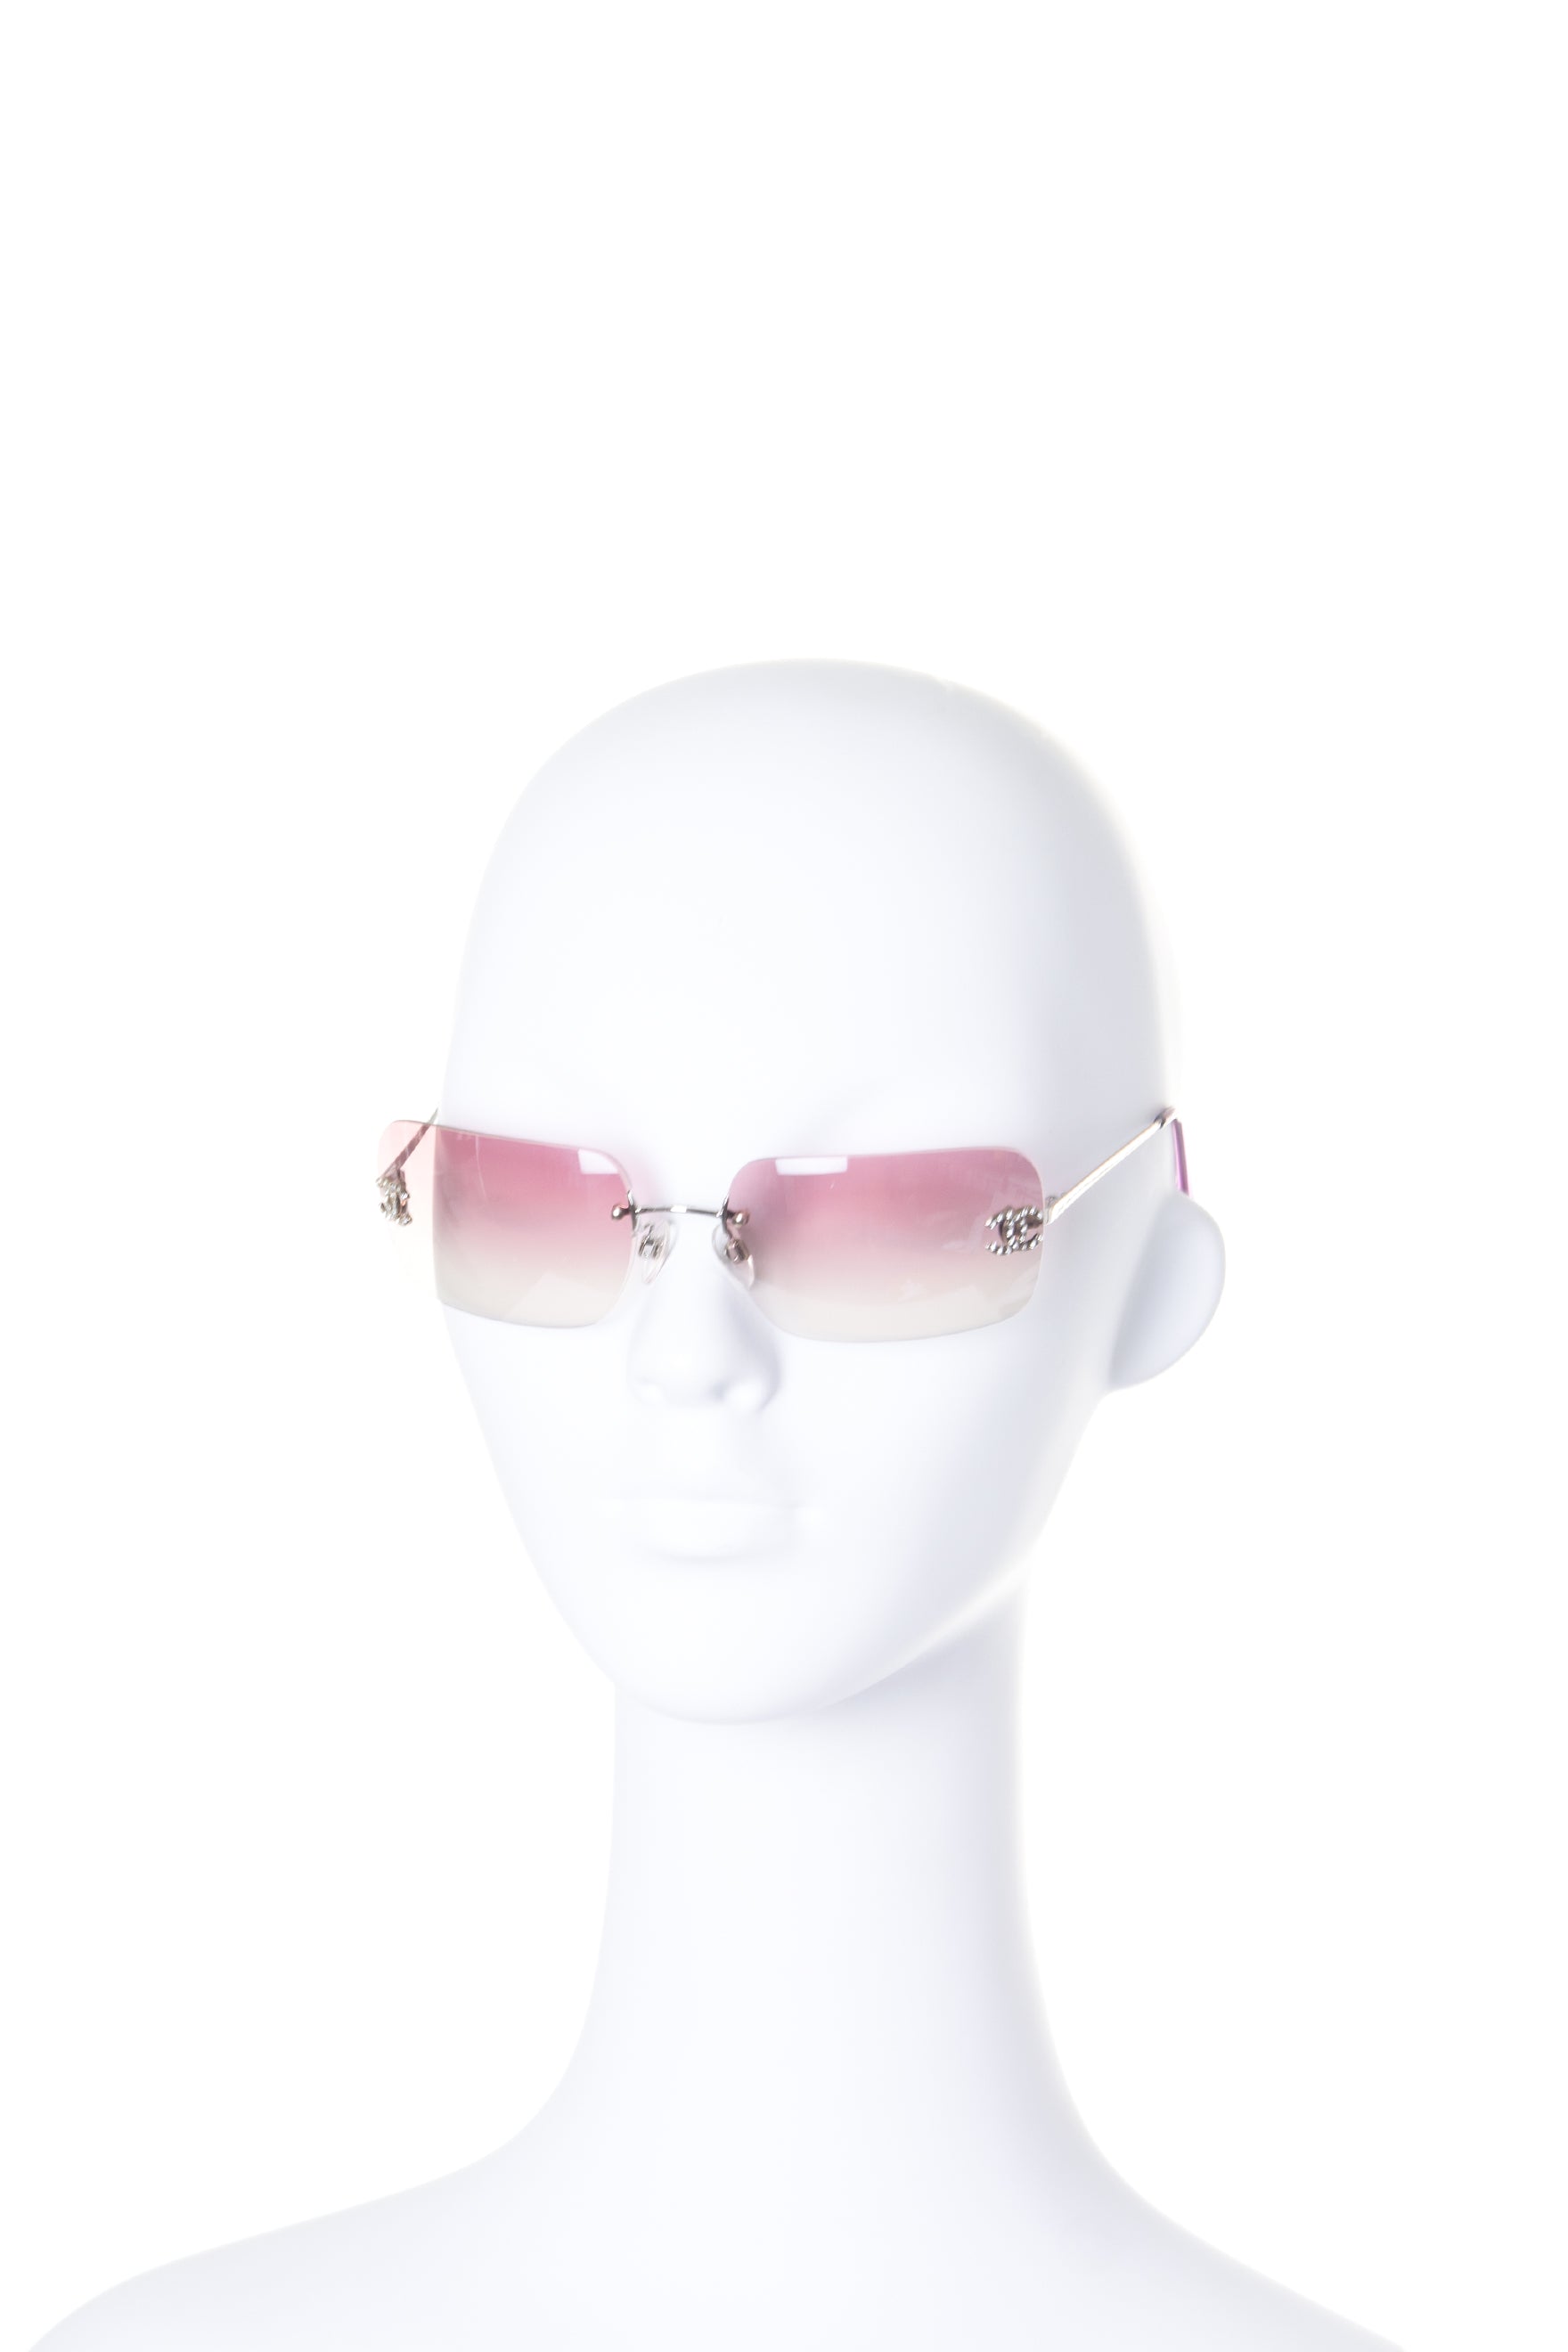 Chanel Ombre Rhinestone Sunglasses as worn by Kylie Jenner  irvrsbl